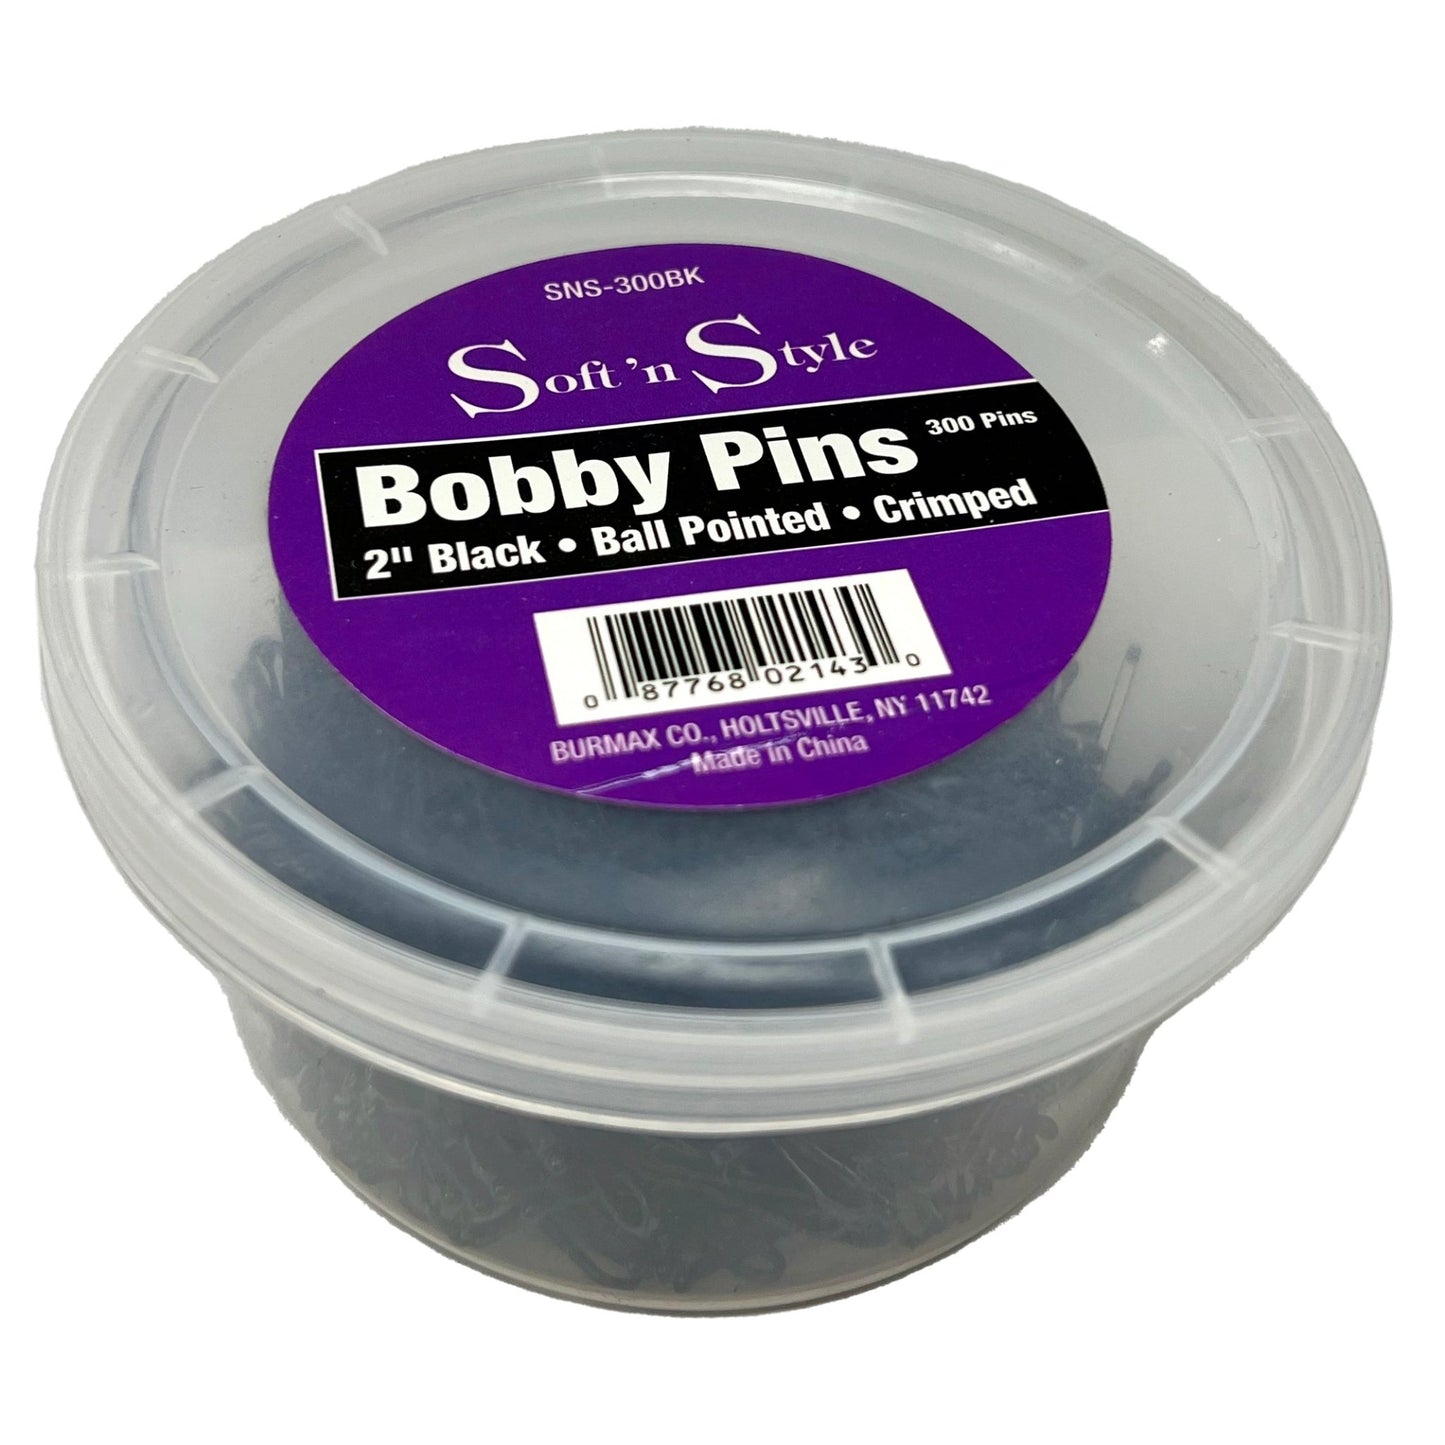 300 Bobby Pins | 2" | Ball Pointed | Crimped | SOFT N STYLE - SH Salons